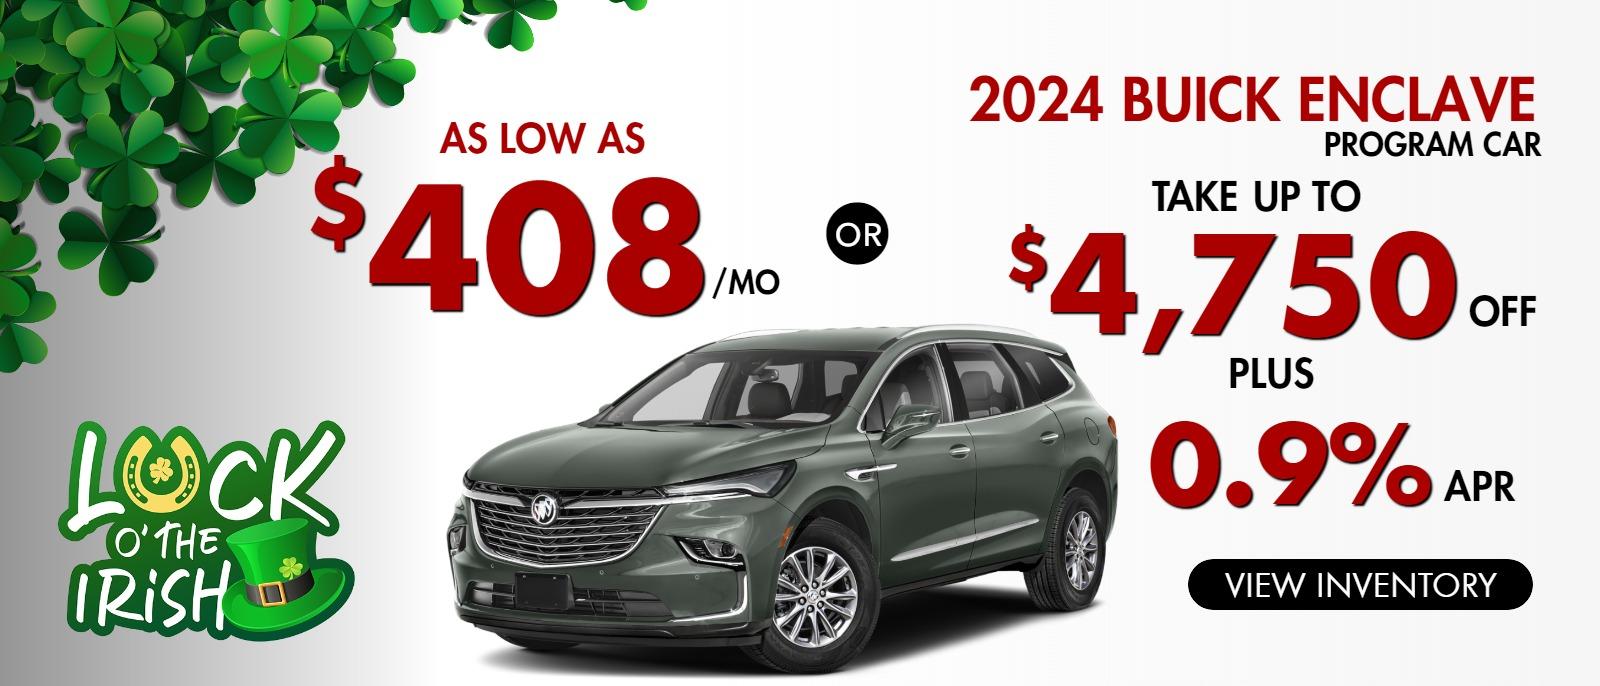 2024 Buick Enclave
Stock L5660

Take up to $4750 OFF 
OR A
S LOW AS $408/mo
& 0.9% finance